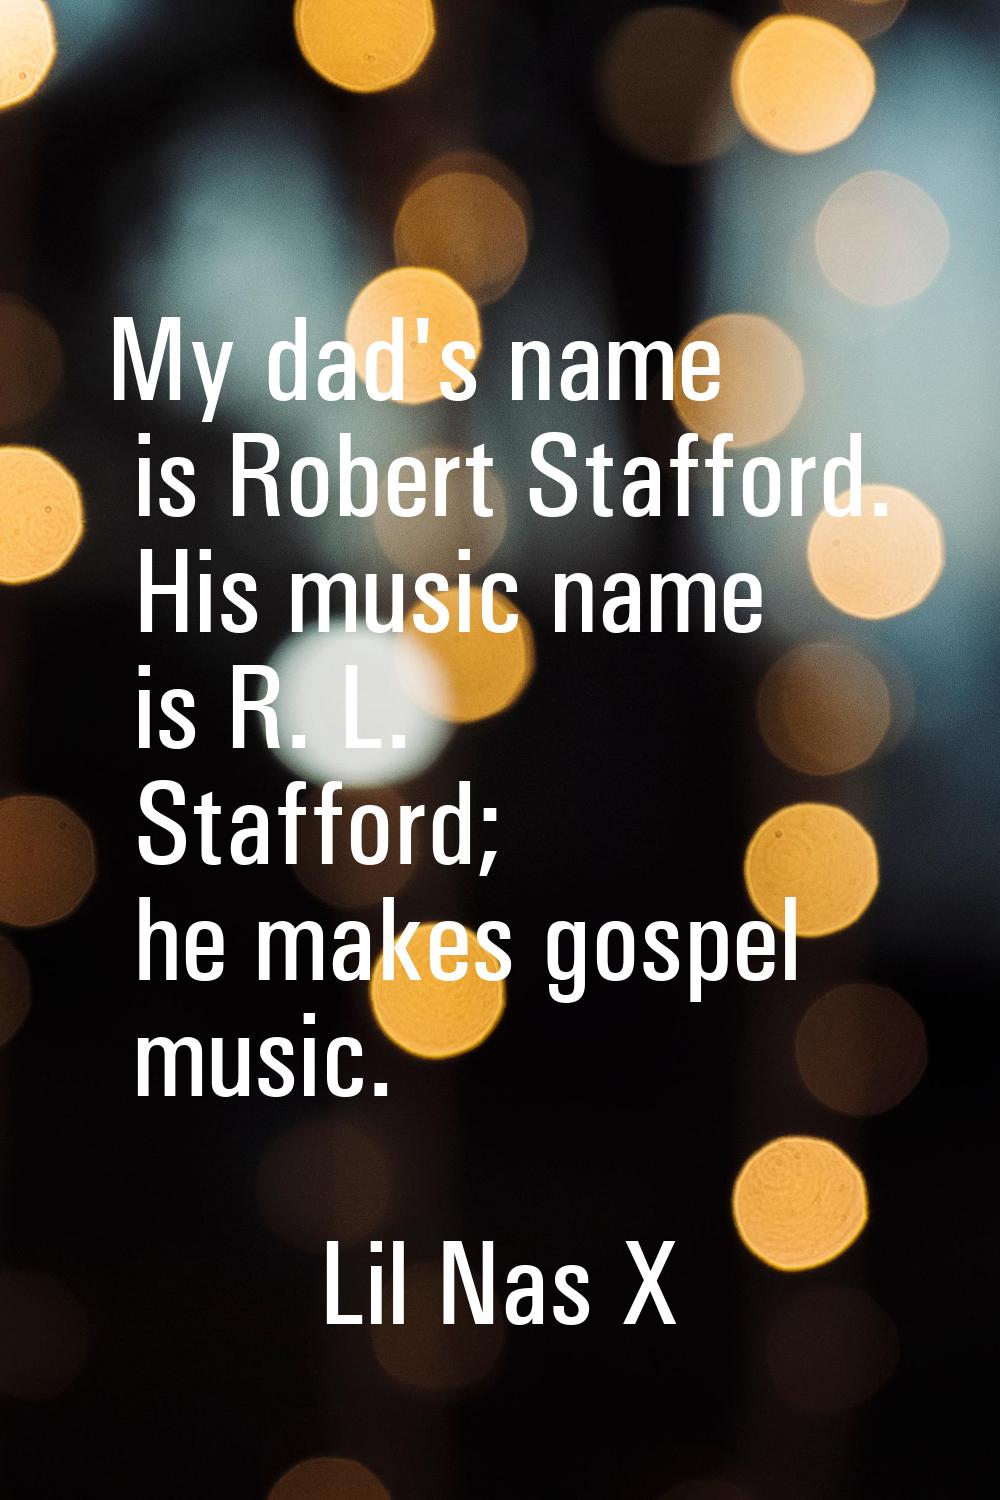 My dad's name is Robert Stafford. His music name is R. L. Stafford; he makes gospel music.